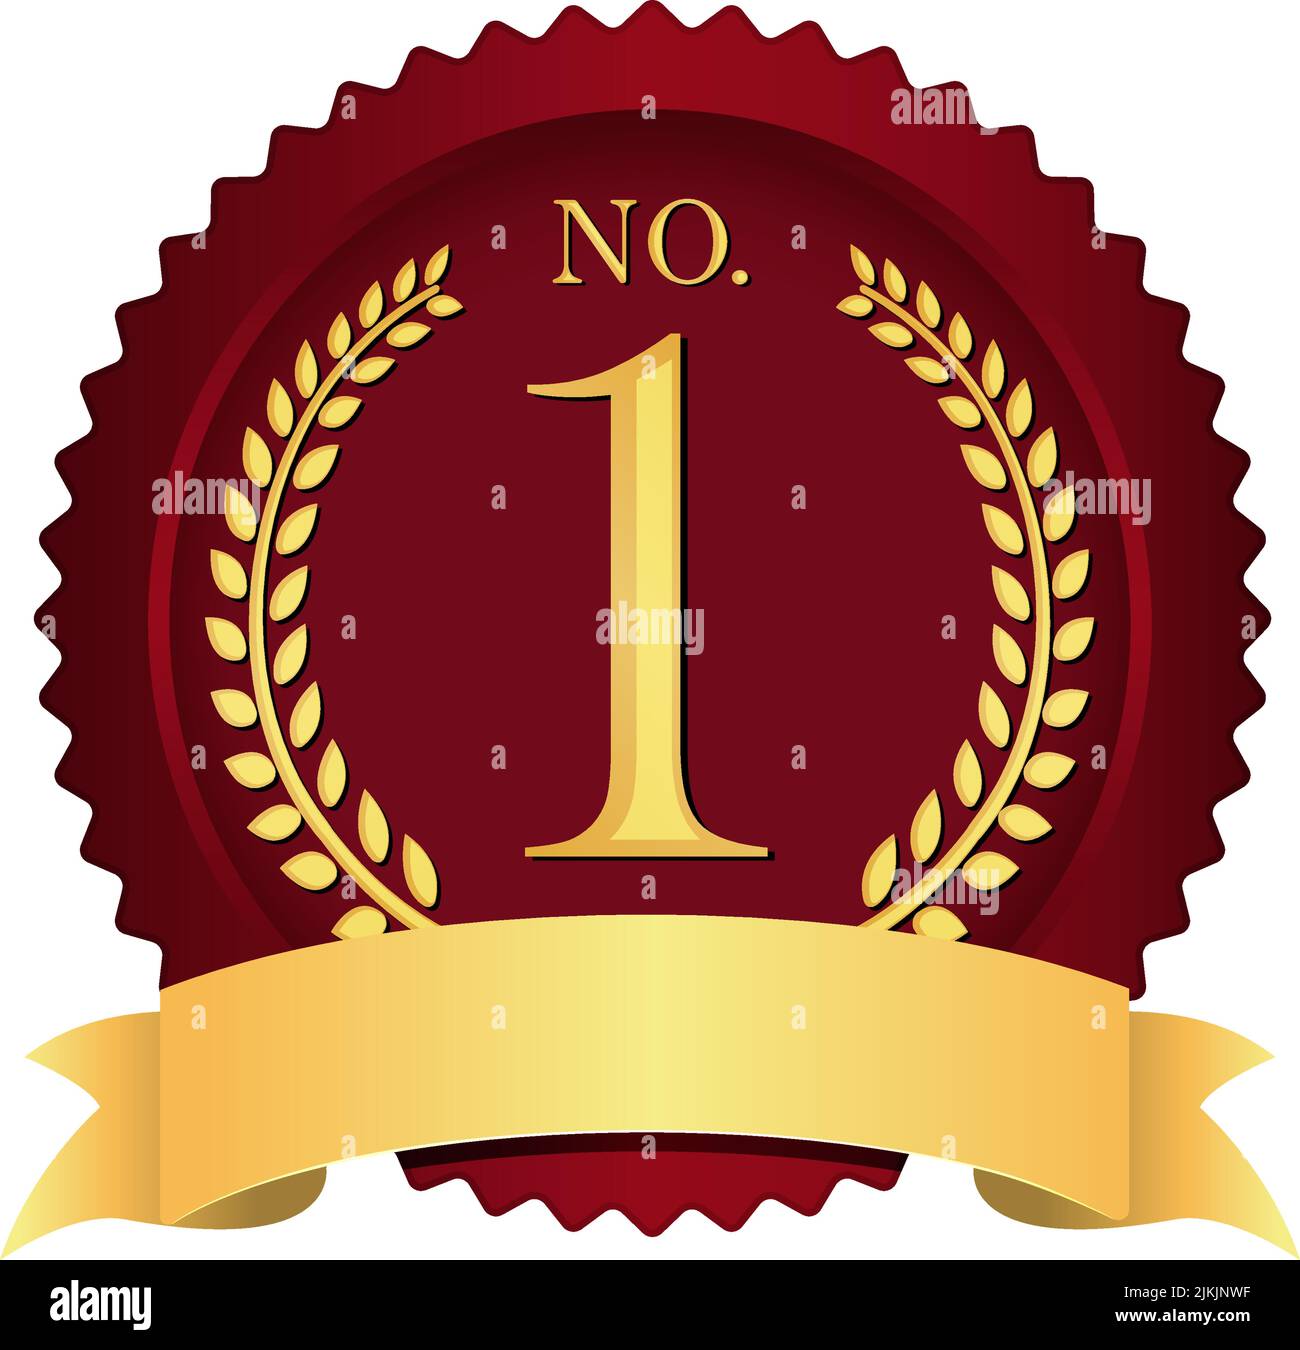 No.1 medal icon illustration ( with text space ) Stock Vector